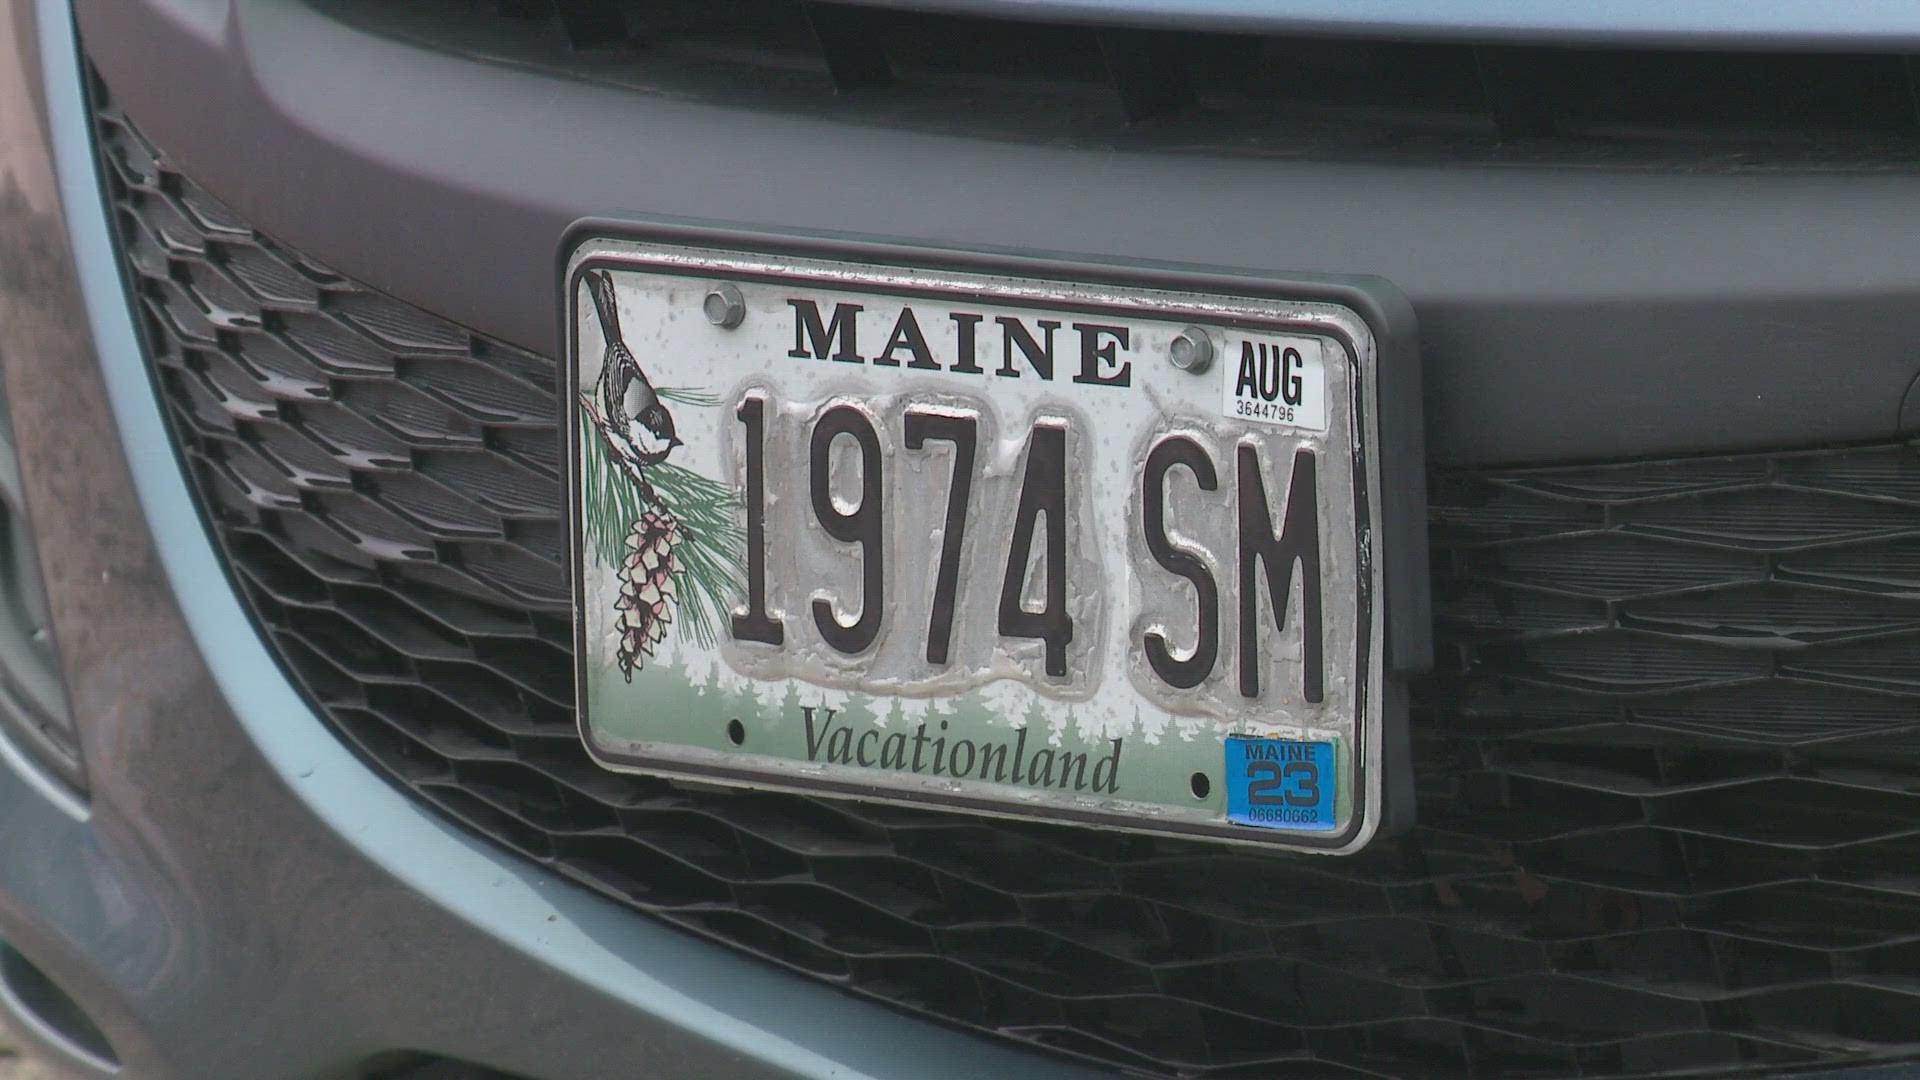 Maine Secretary of State Shenna Bellows said old license plates could be a safety concern.